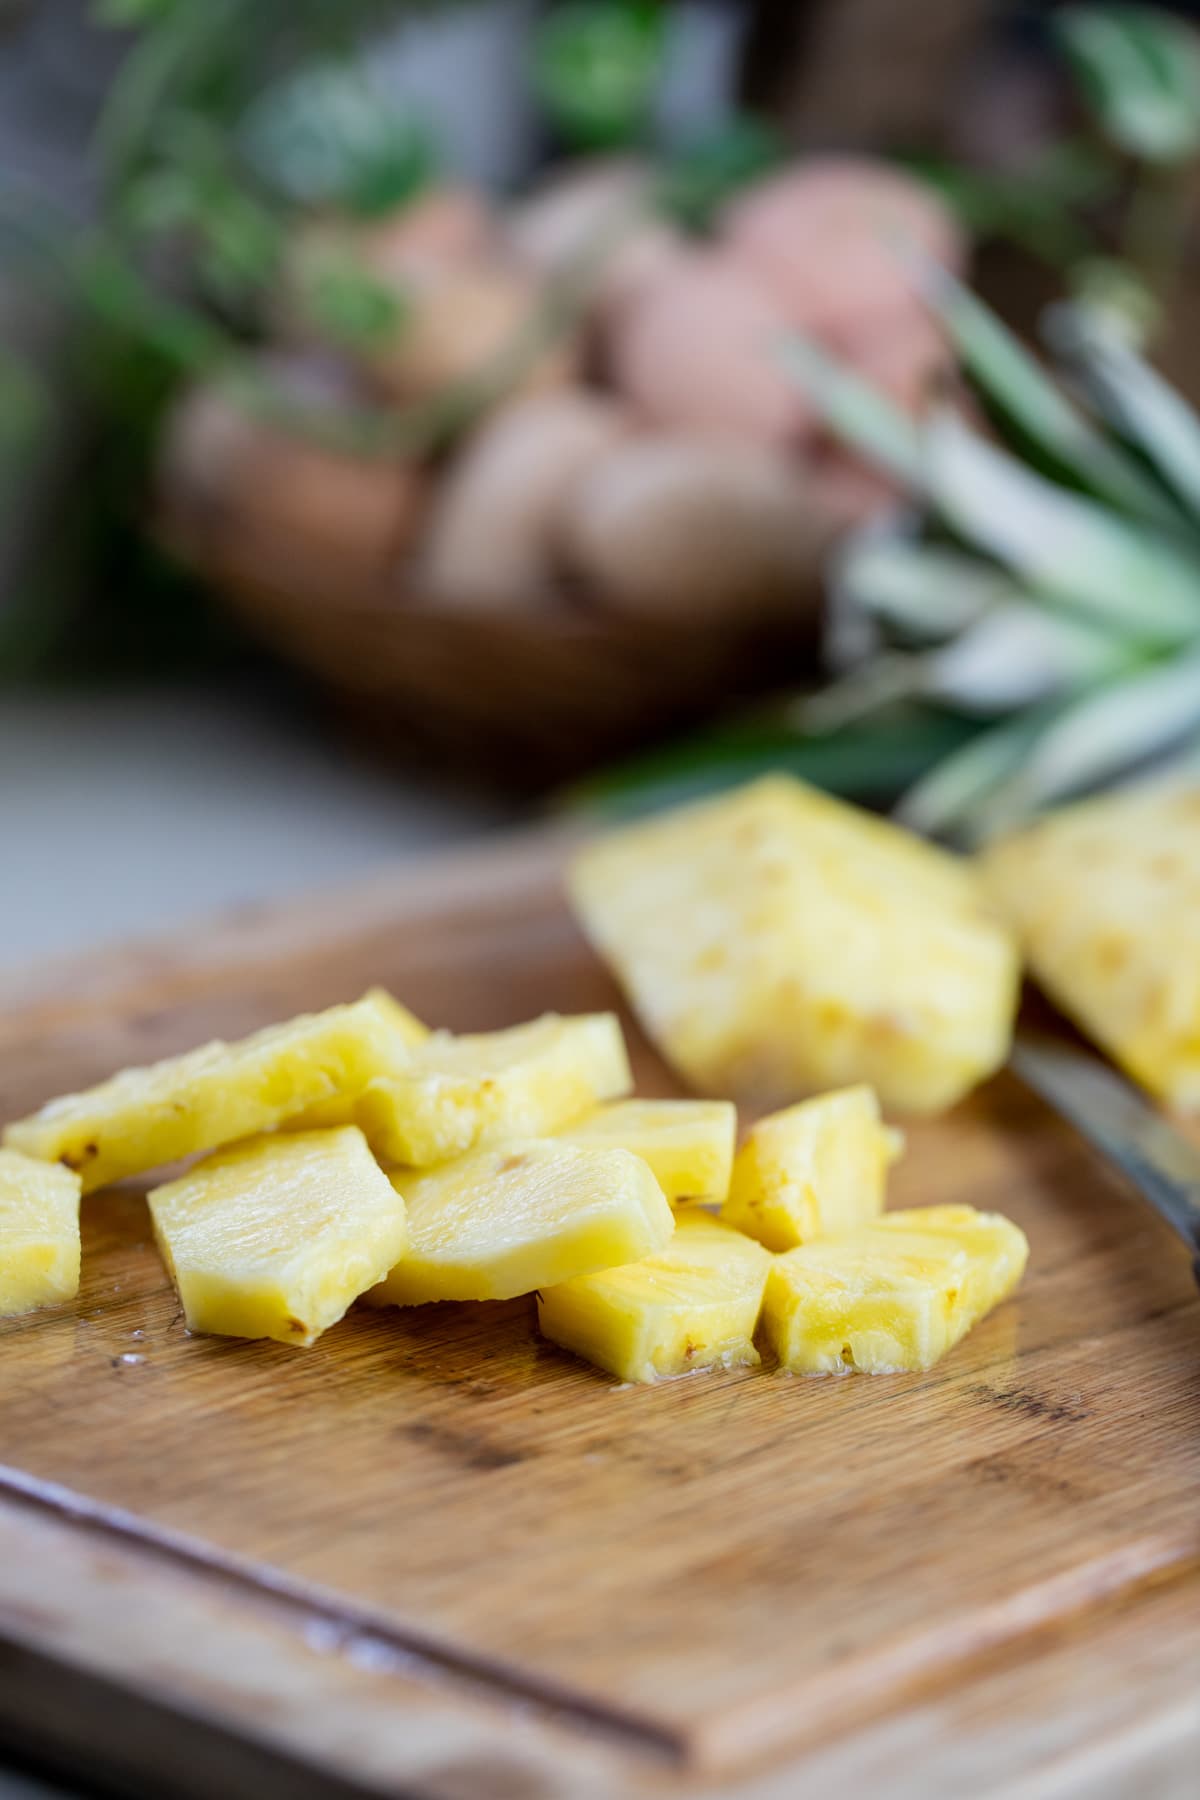 slicing the pineapple